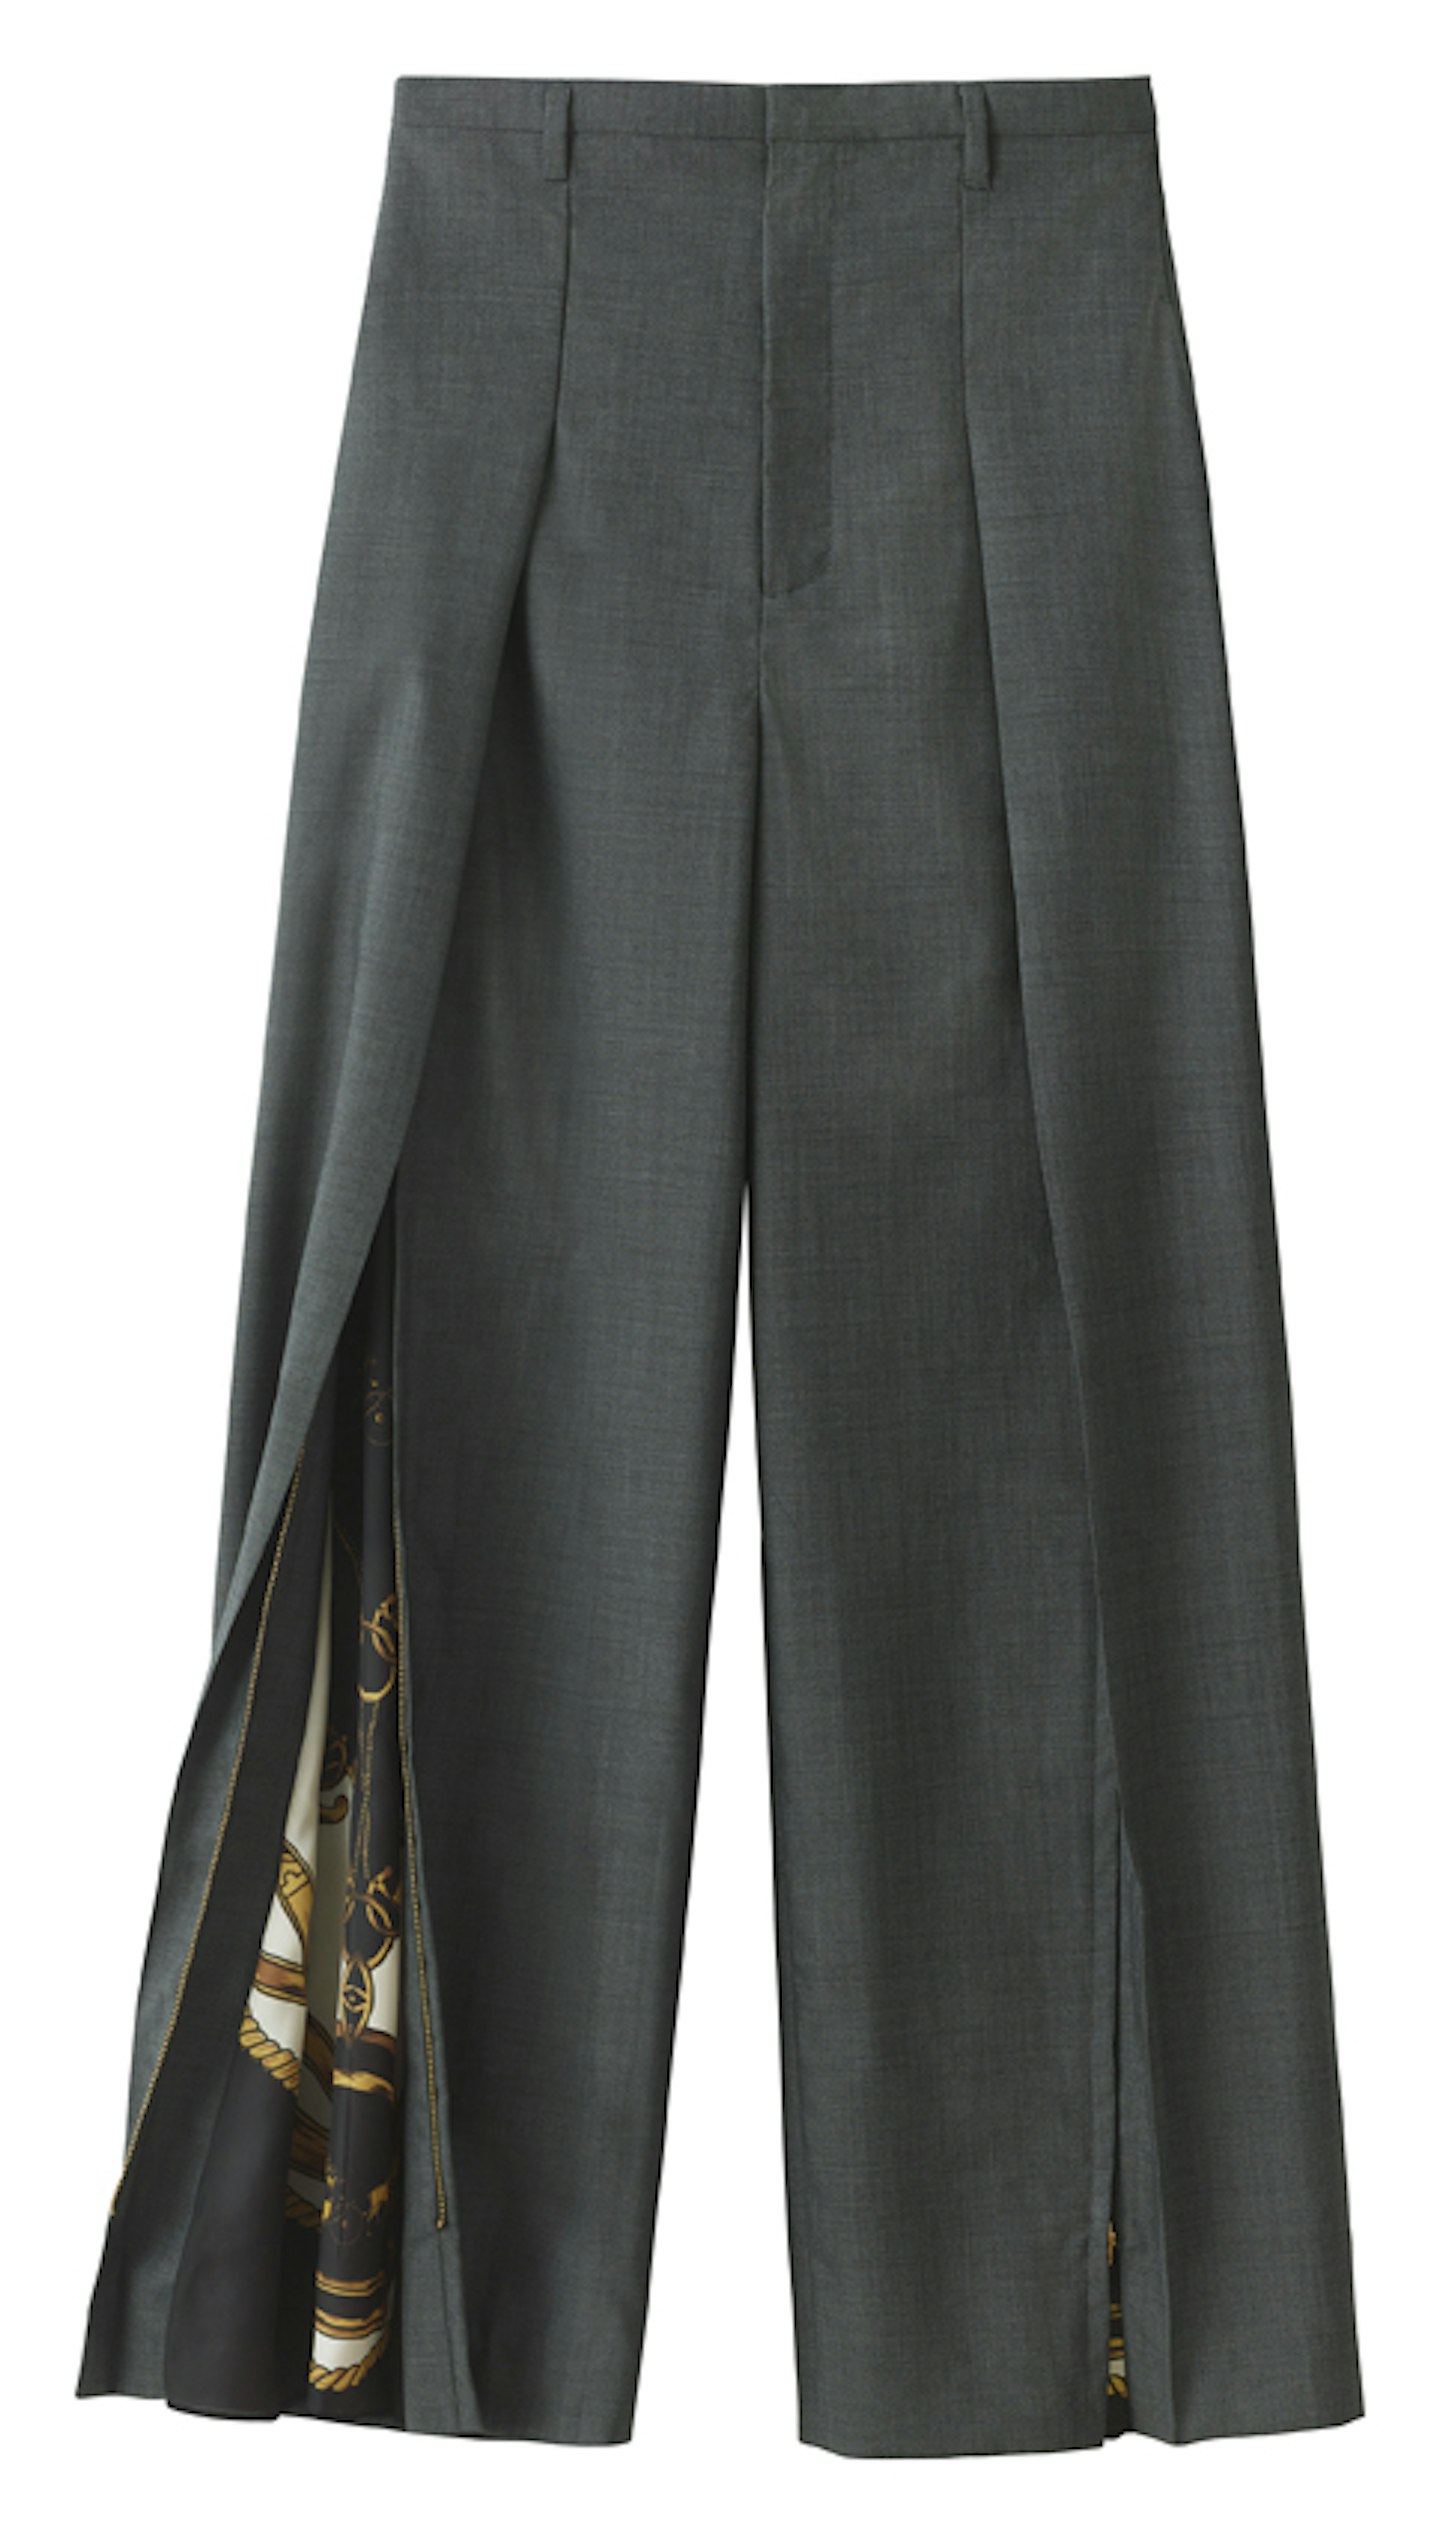 TOGA ARCHIVES x H&M, Grey Trousers, £79.99